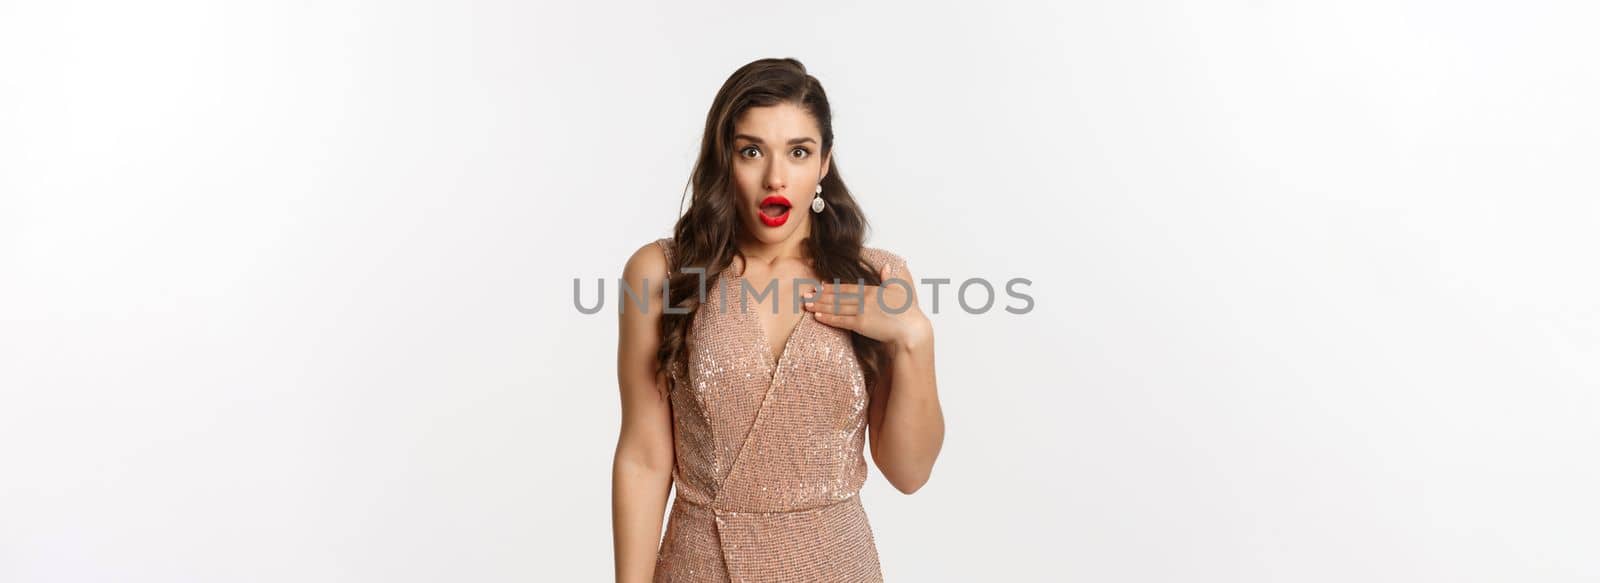 Winter holidays and party concept. Image of attractive woman with red lips, wearing glamour dress and pointing at herself with shock, looking surprised, standing over white background.